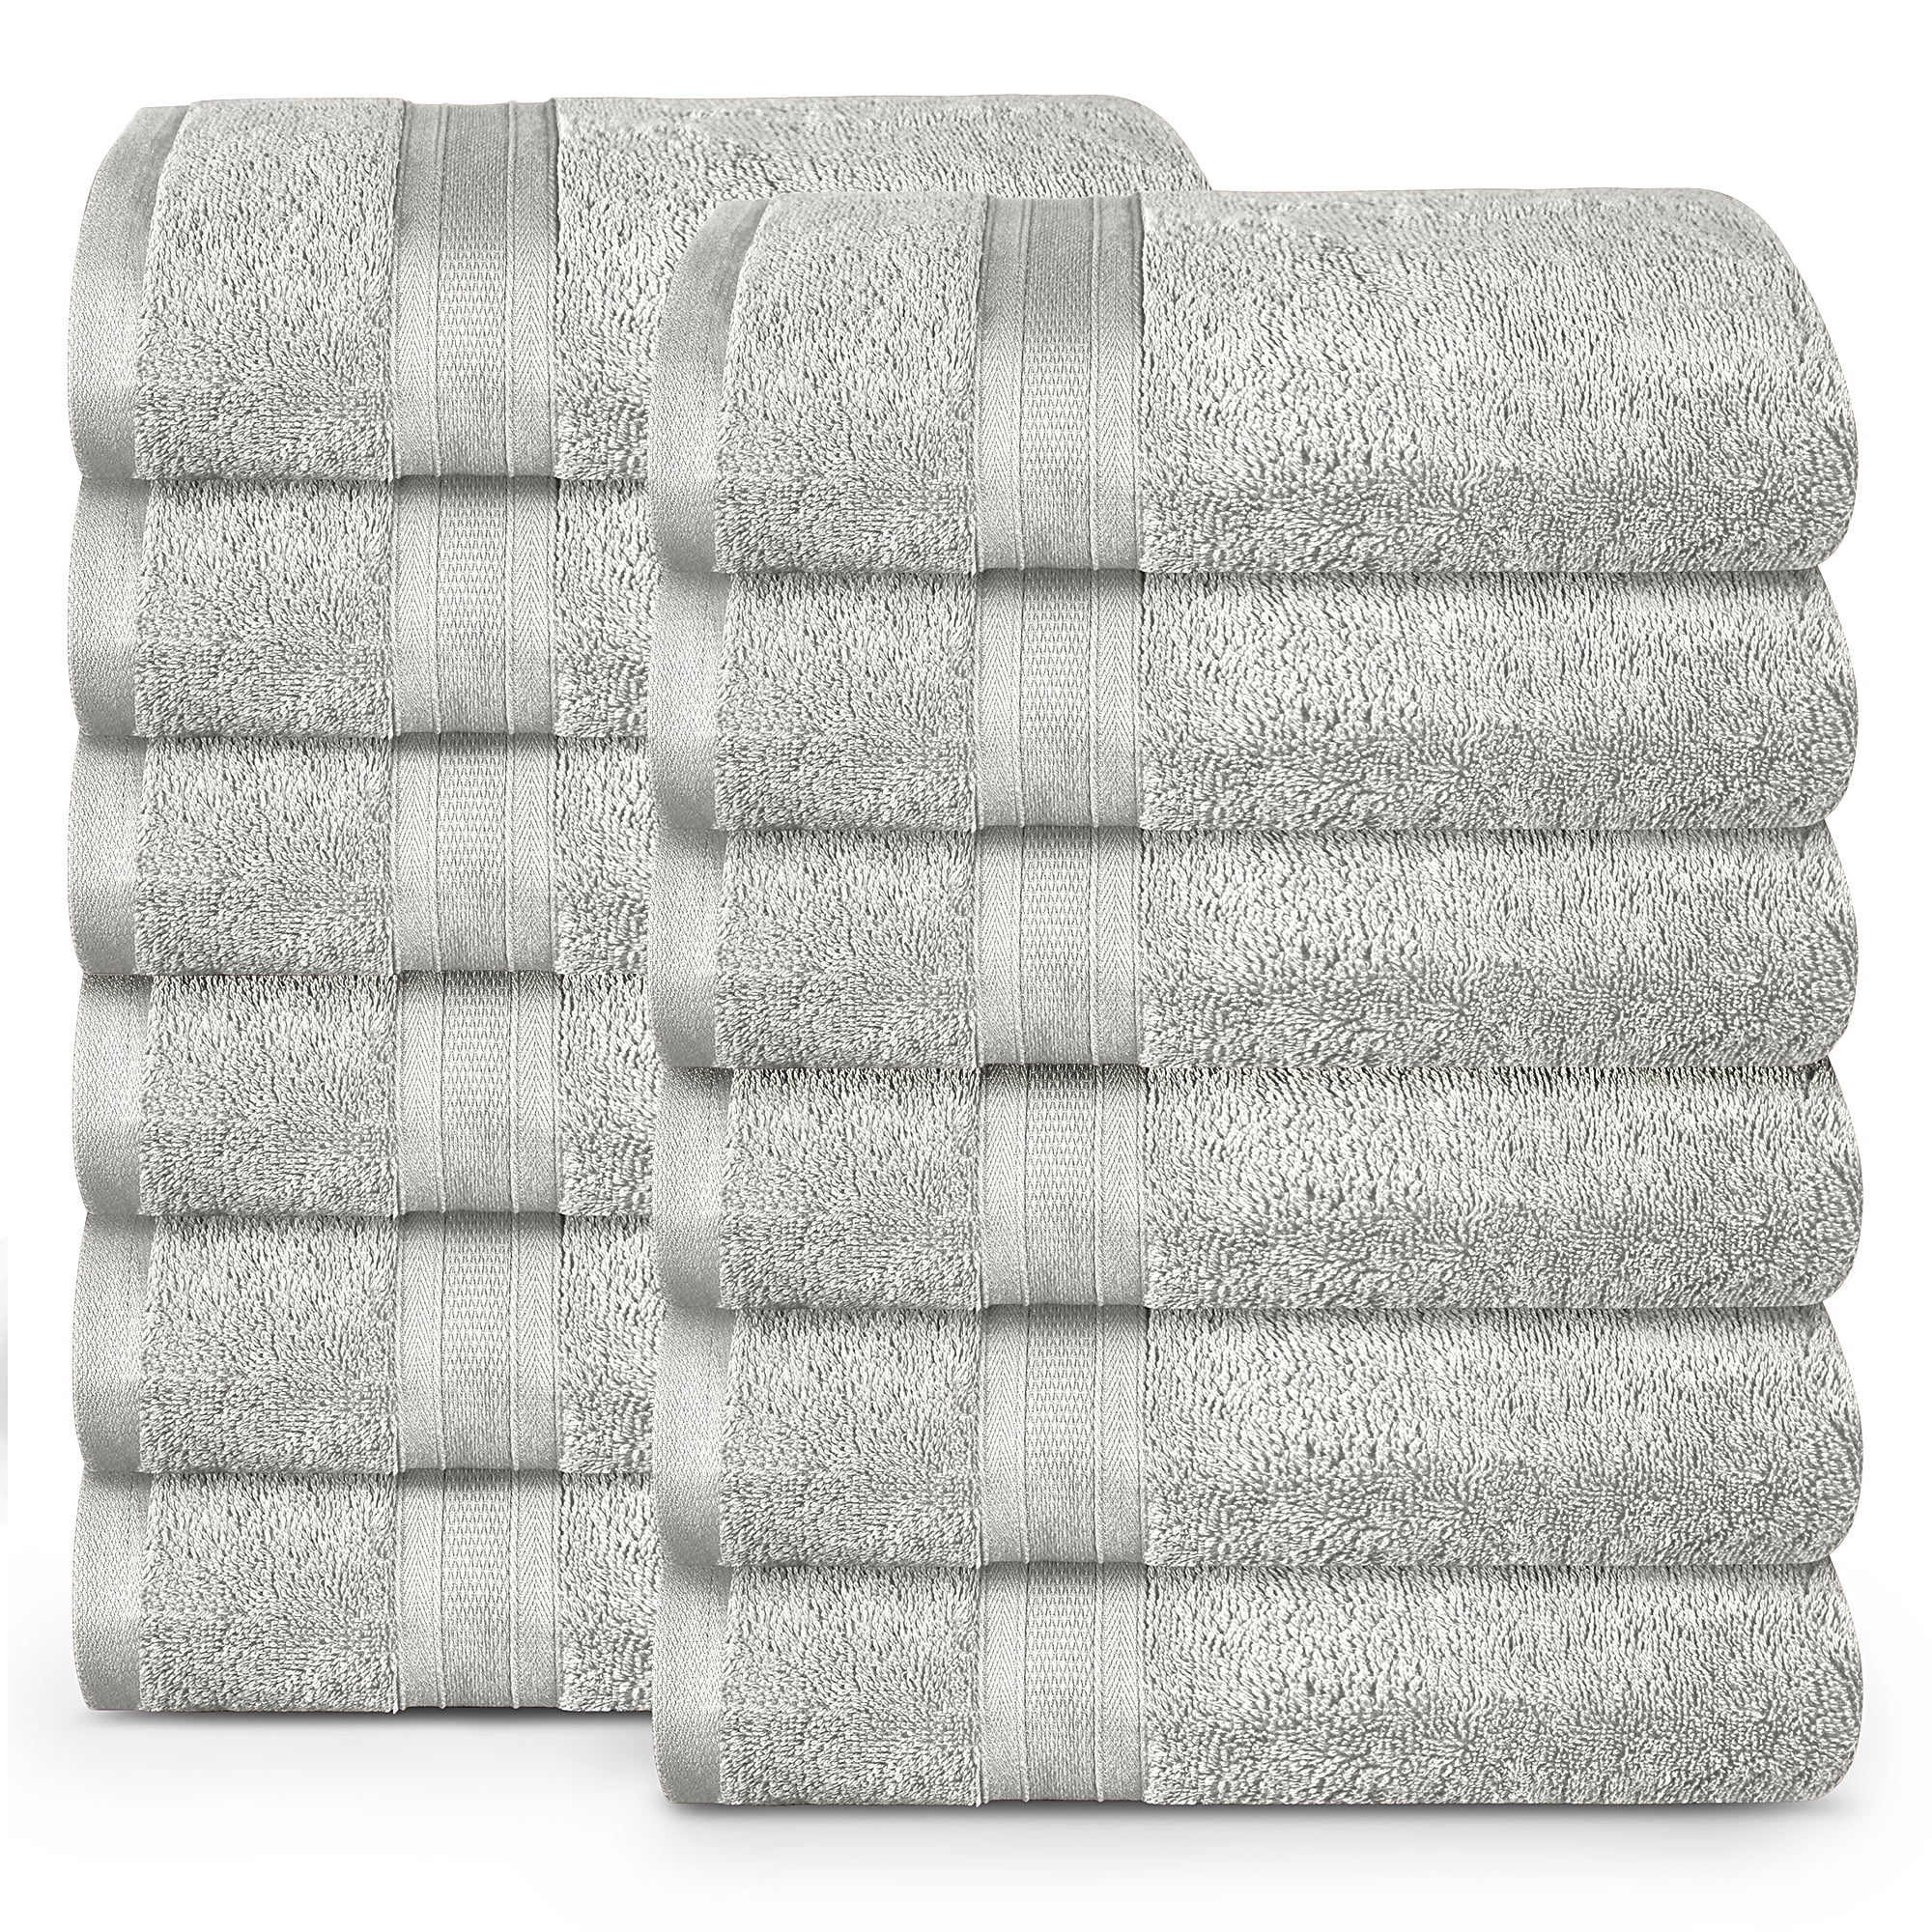 Utopia Towels Premium 700 GSM Cotton Washcloths - 12 Pack, White, 12 x 12 Inches Extra Soft Wash Cloths